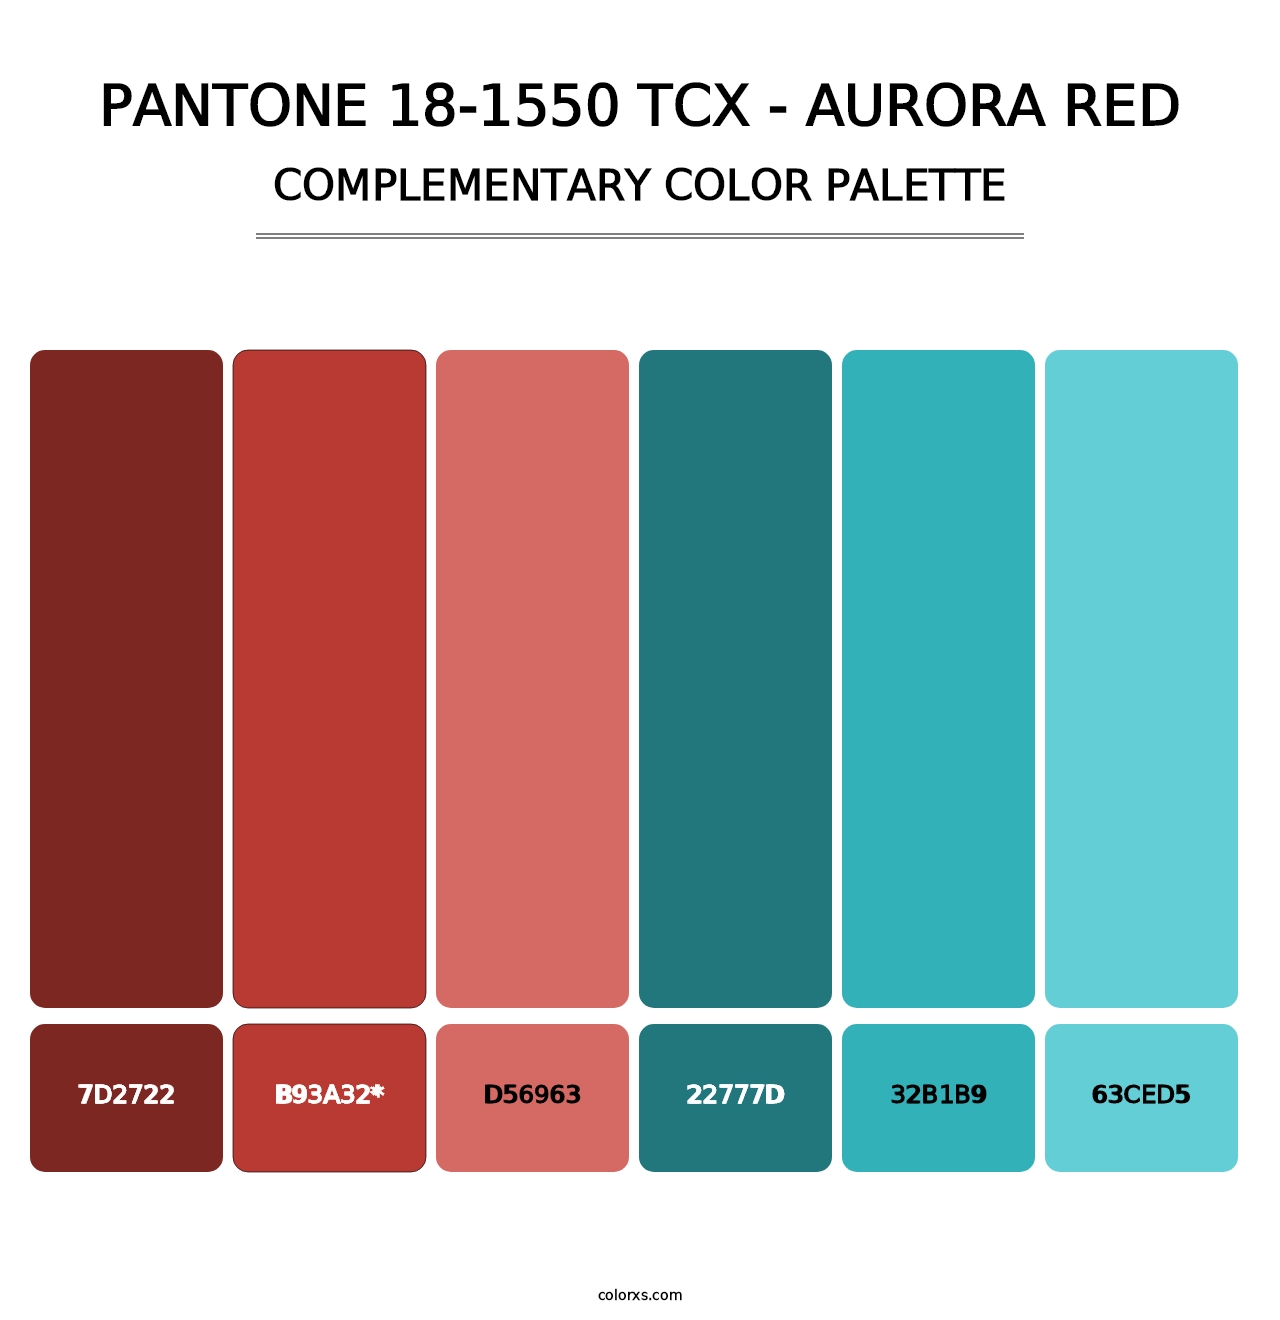 PANTONE 18-1550 TCX - Aurora Red - Complementary Color Palette